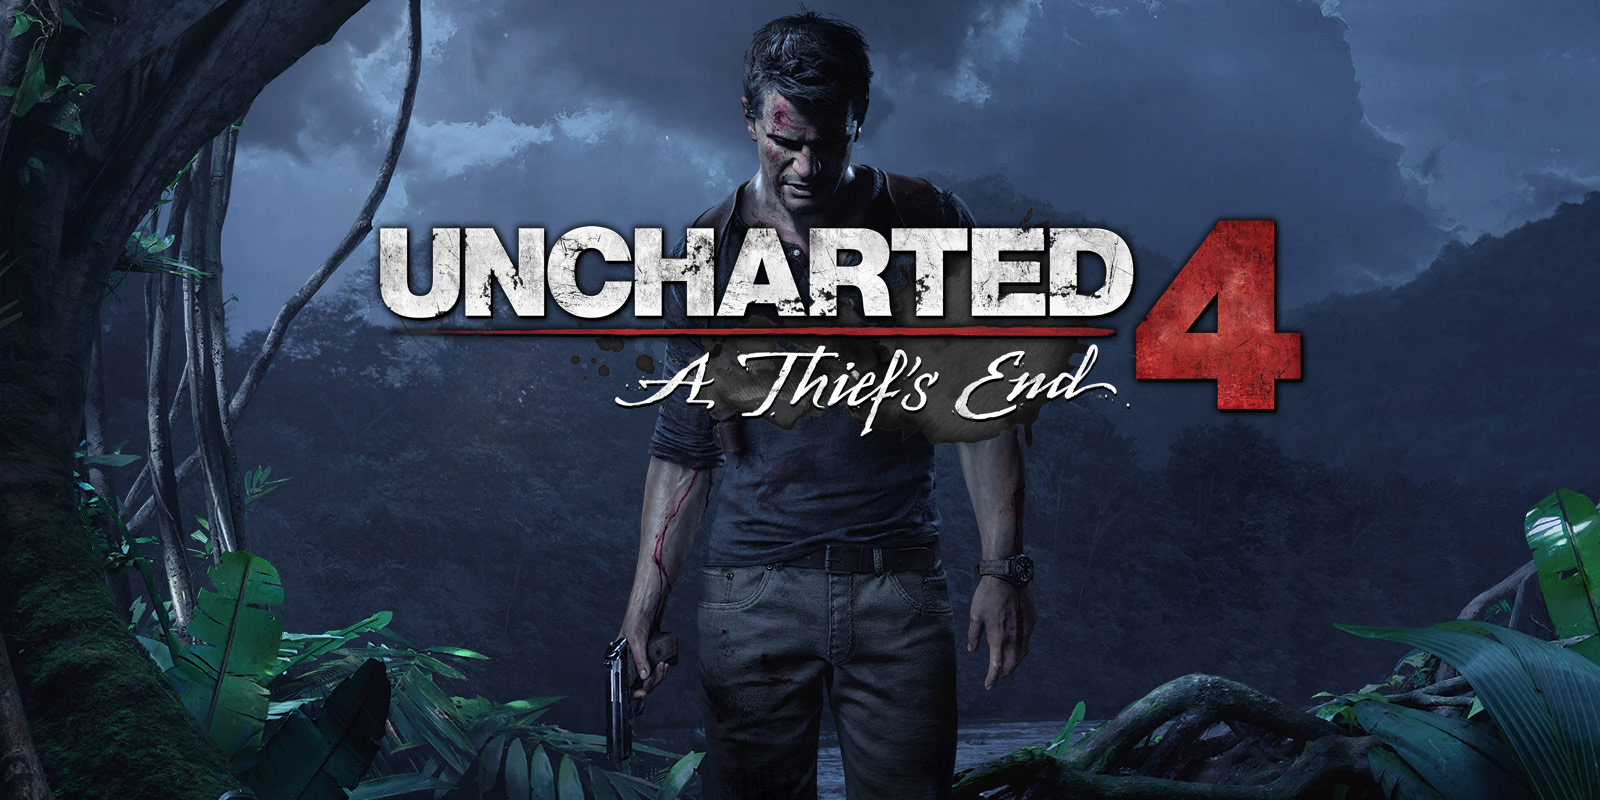 Uncharted 4: A Thief’s End, nuova immagine di Nathan Drake